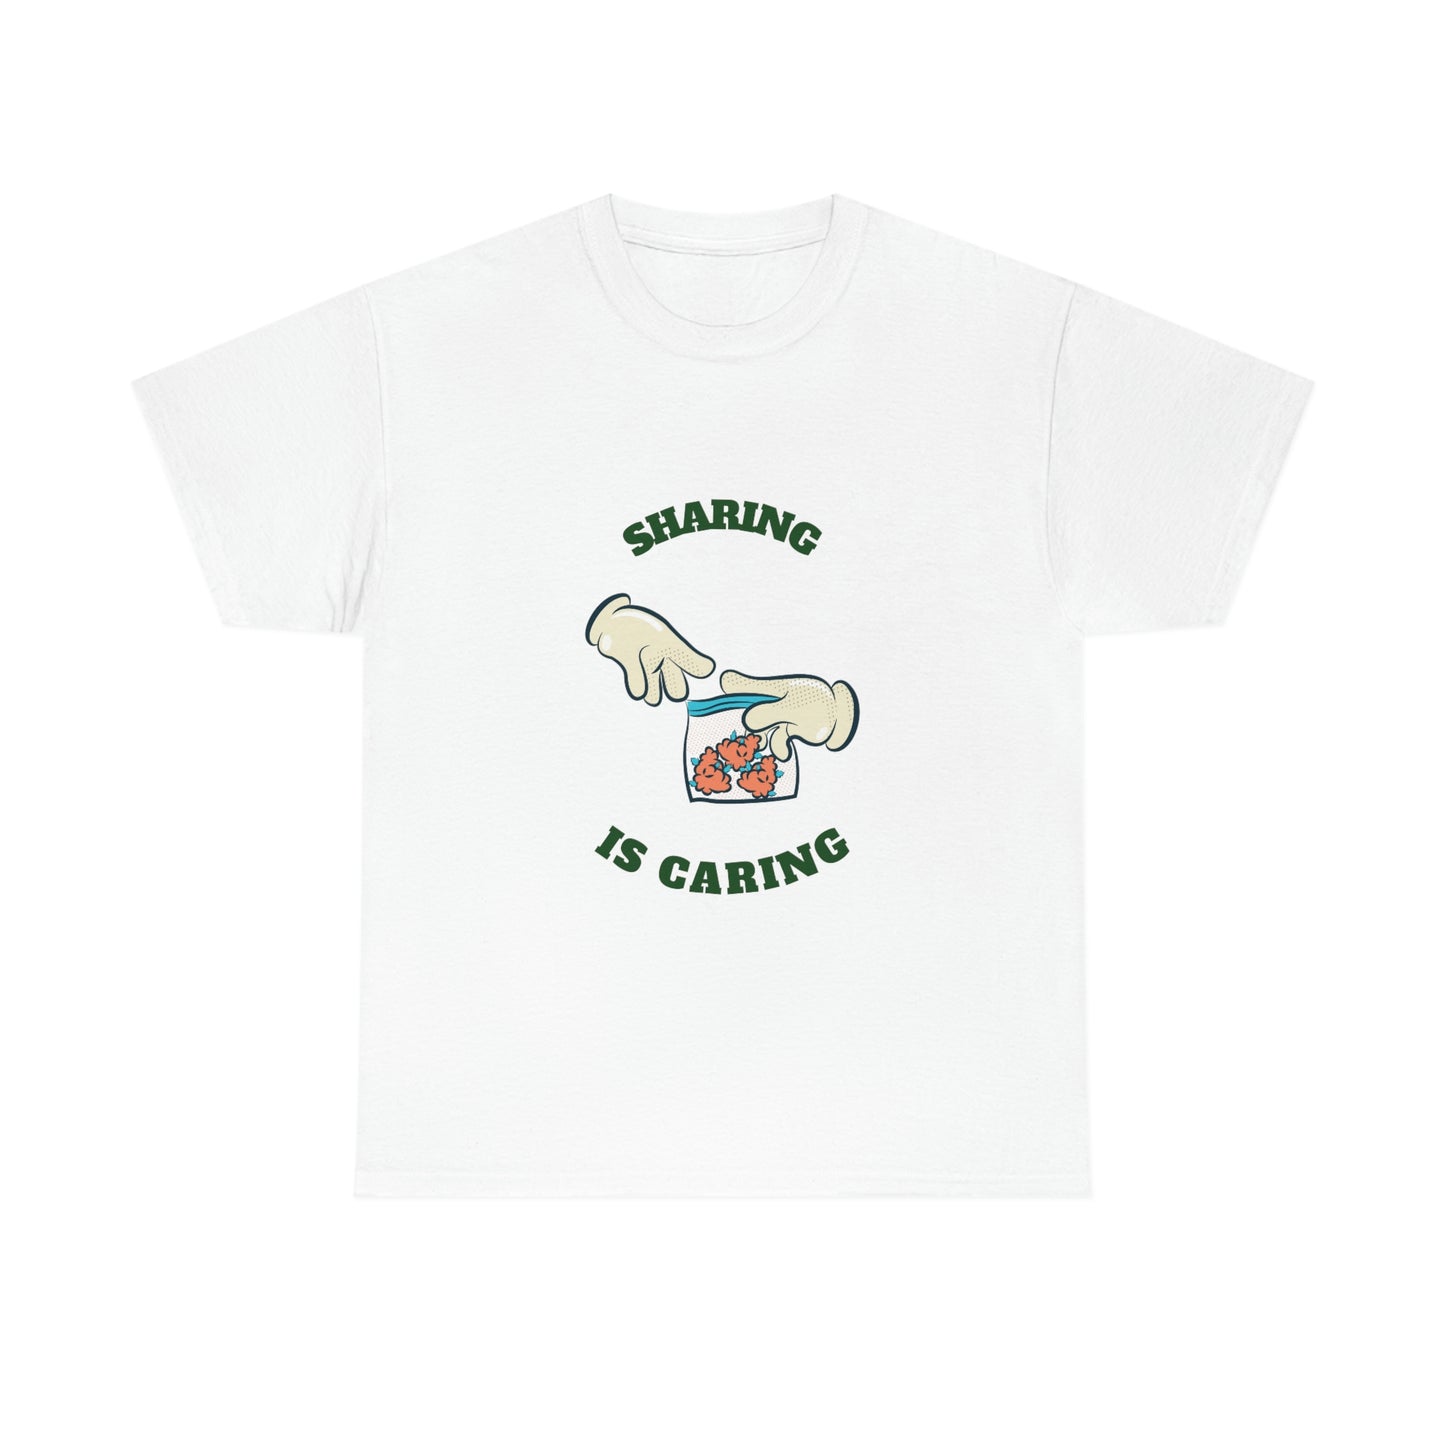 Sharing is Caring - Unisex tee